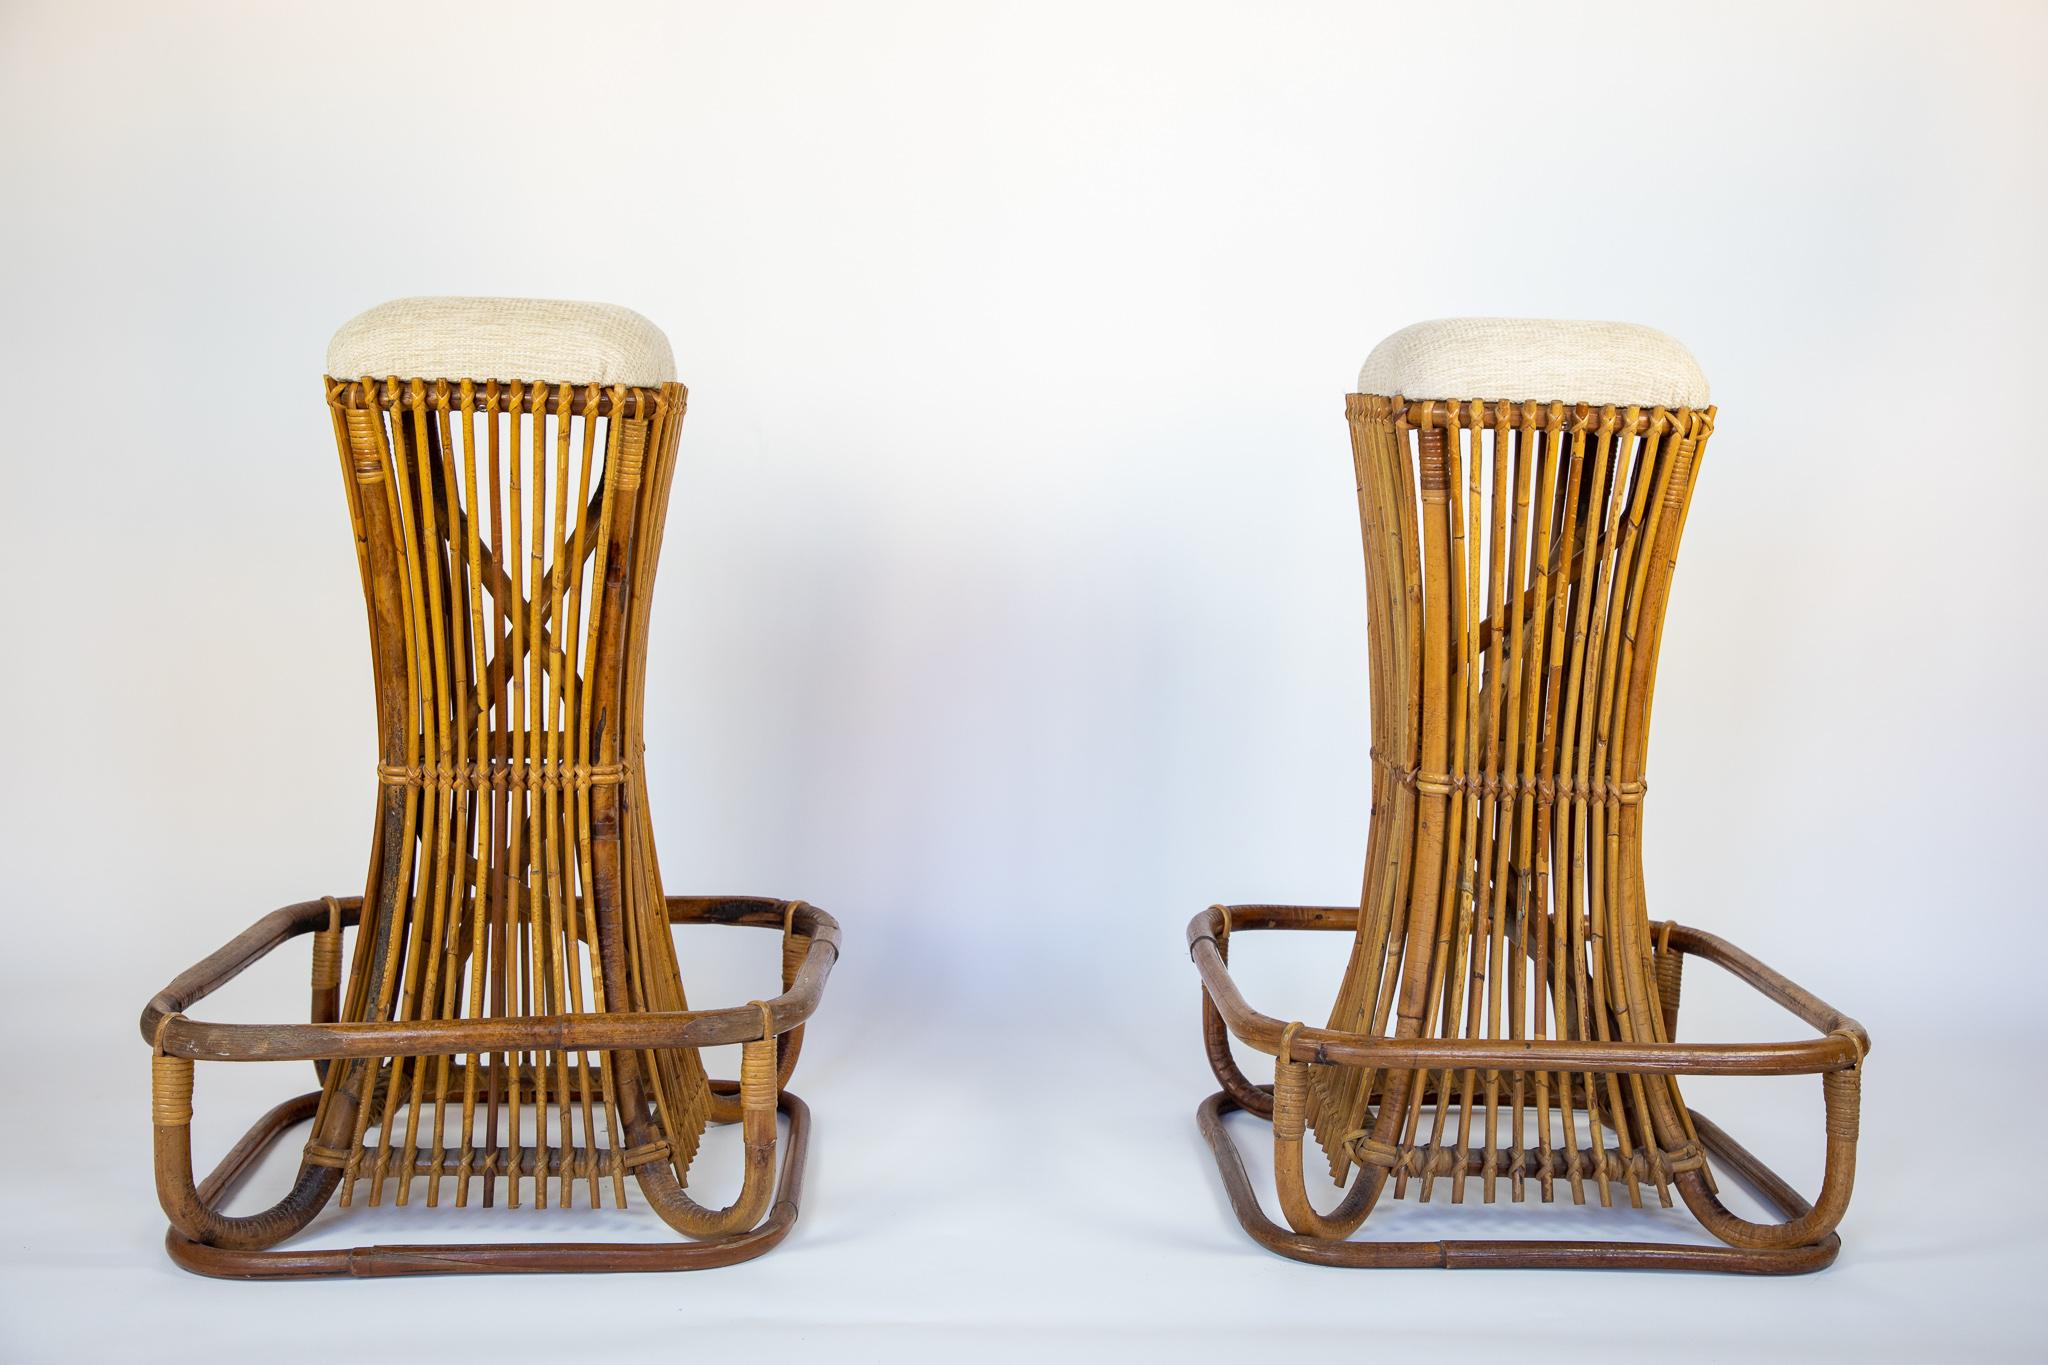 Handcrafted Rattan Bar Stools by Tito Agnoli, Italy 1960s.

This set of Mid-Century Modern rattan bar stools was handcrafted by Tito Agnoli for Bonacina in 1960s. Made from high-quality natural materials, this set is in a good original condition